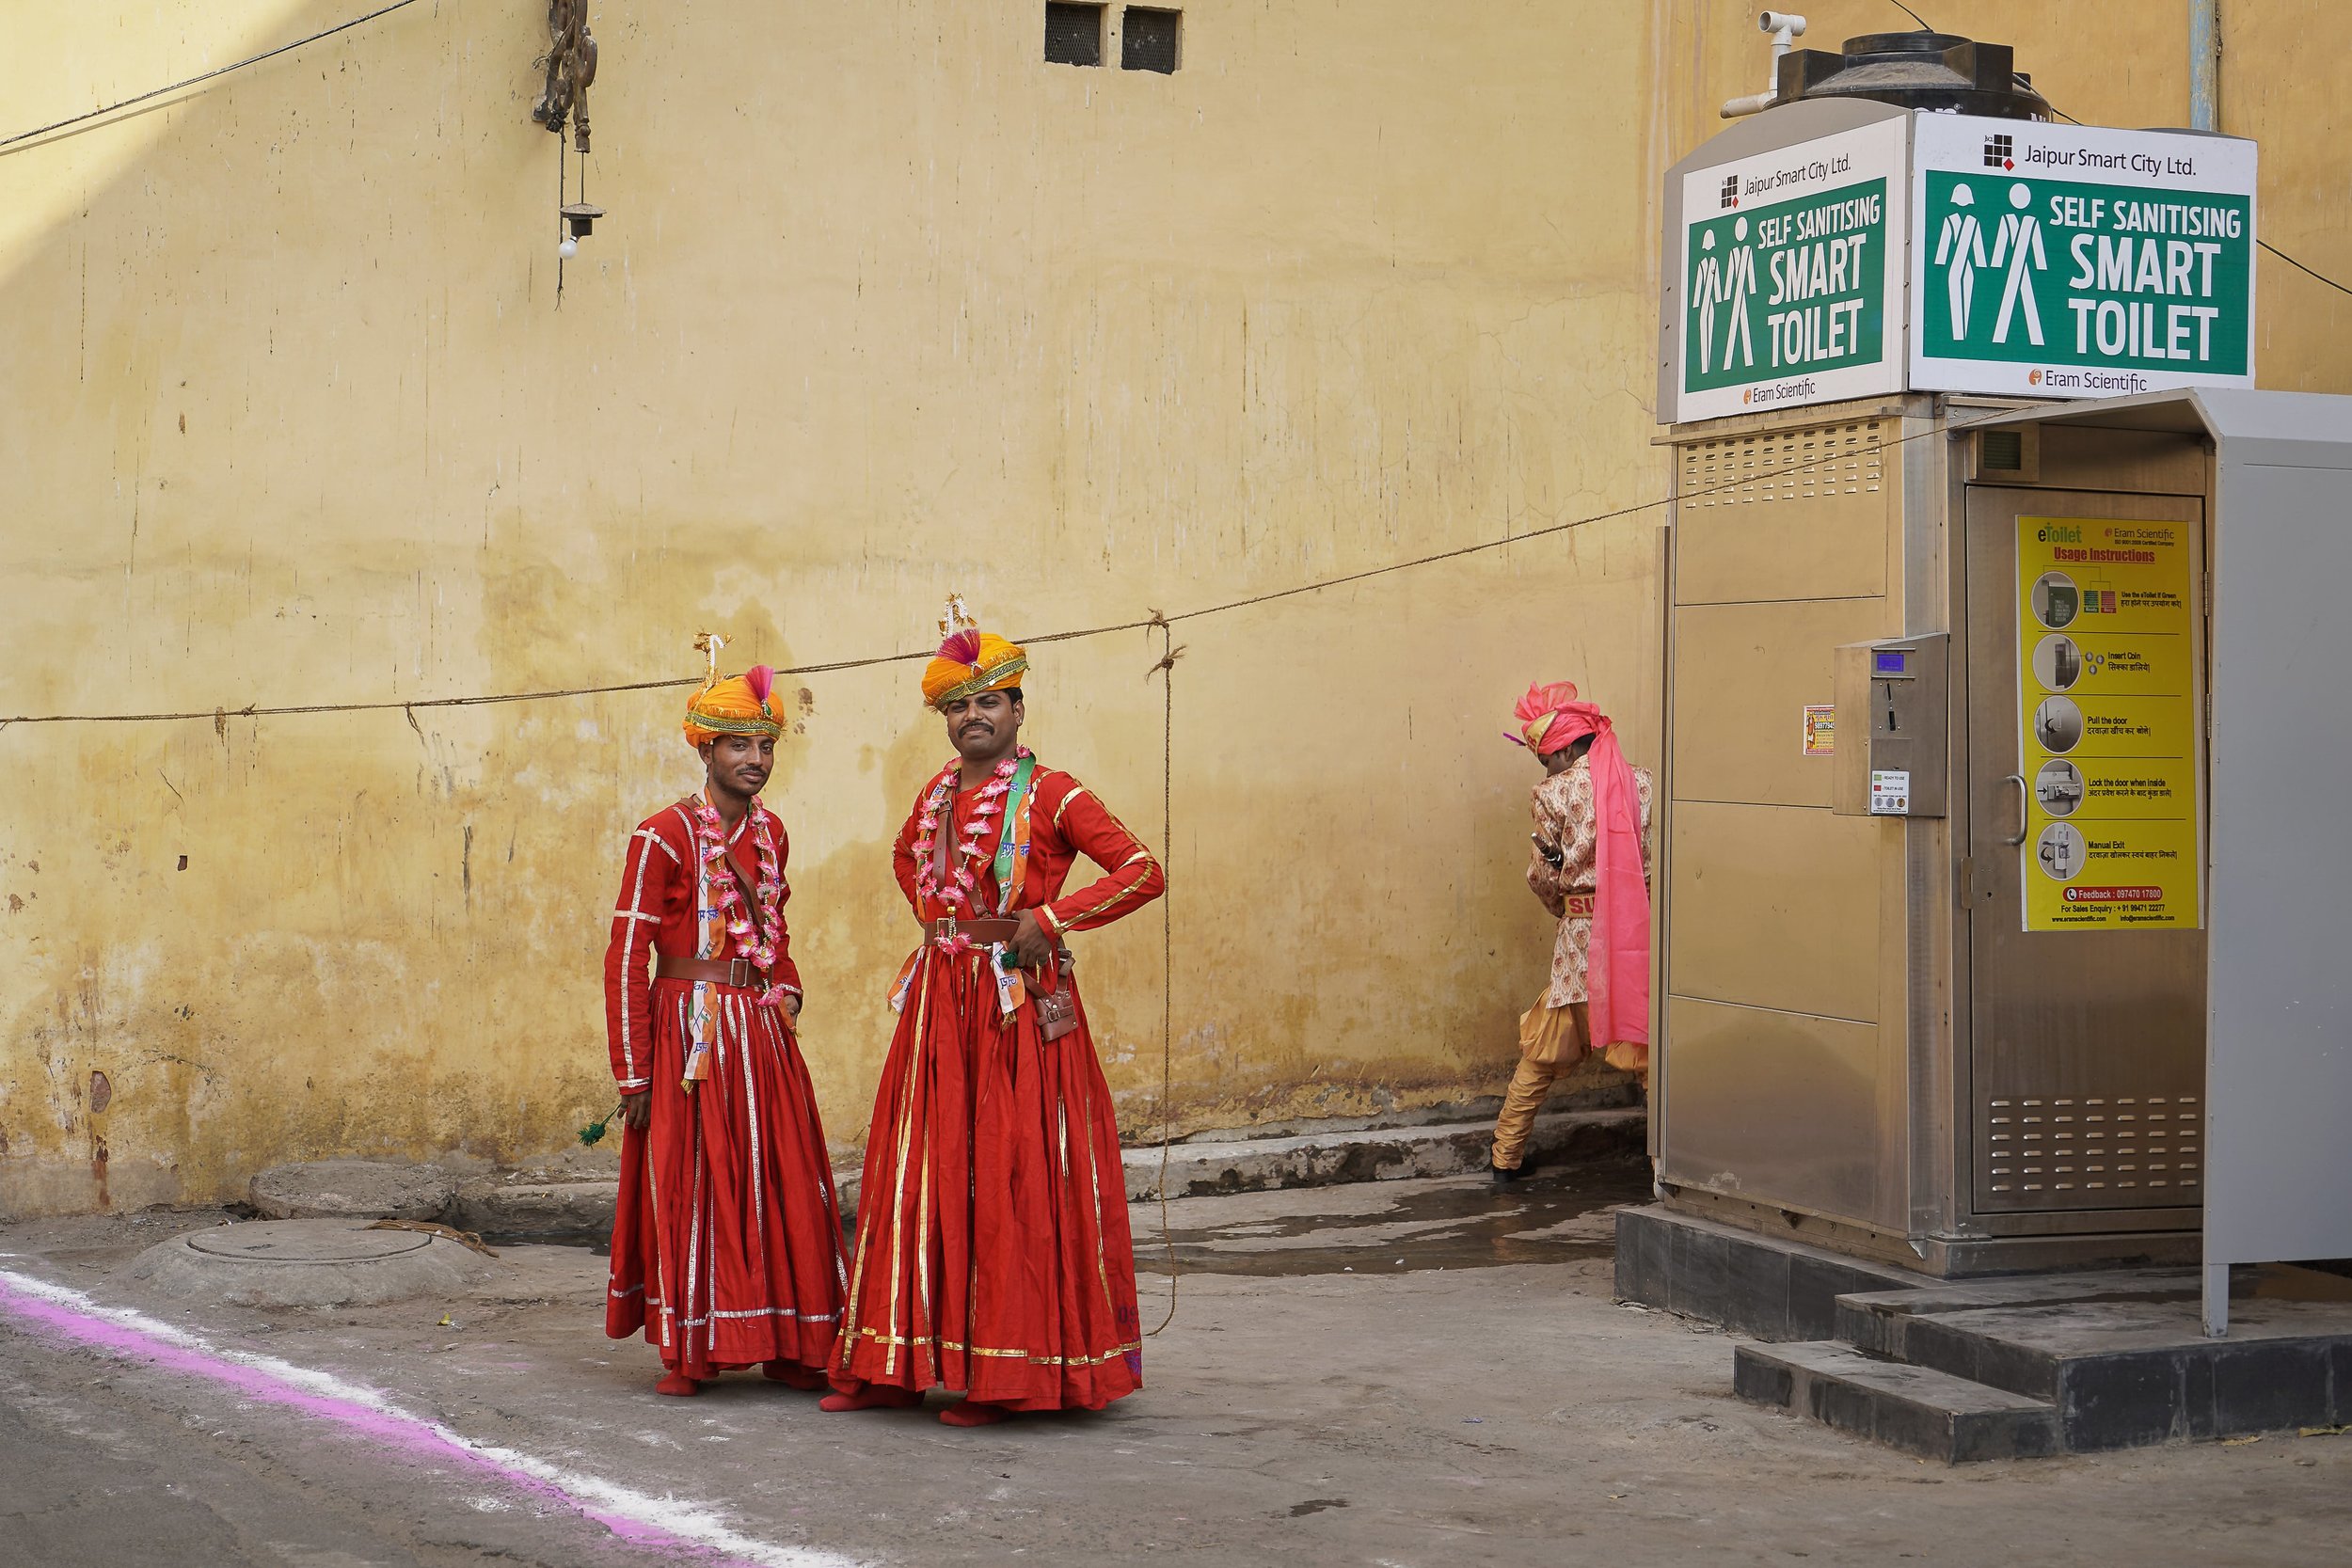 Men in traditional indian clothes with man in background urinating against wall